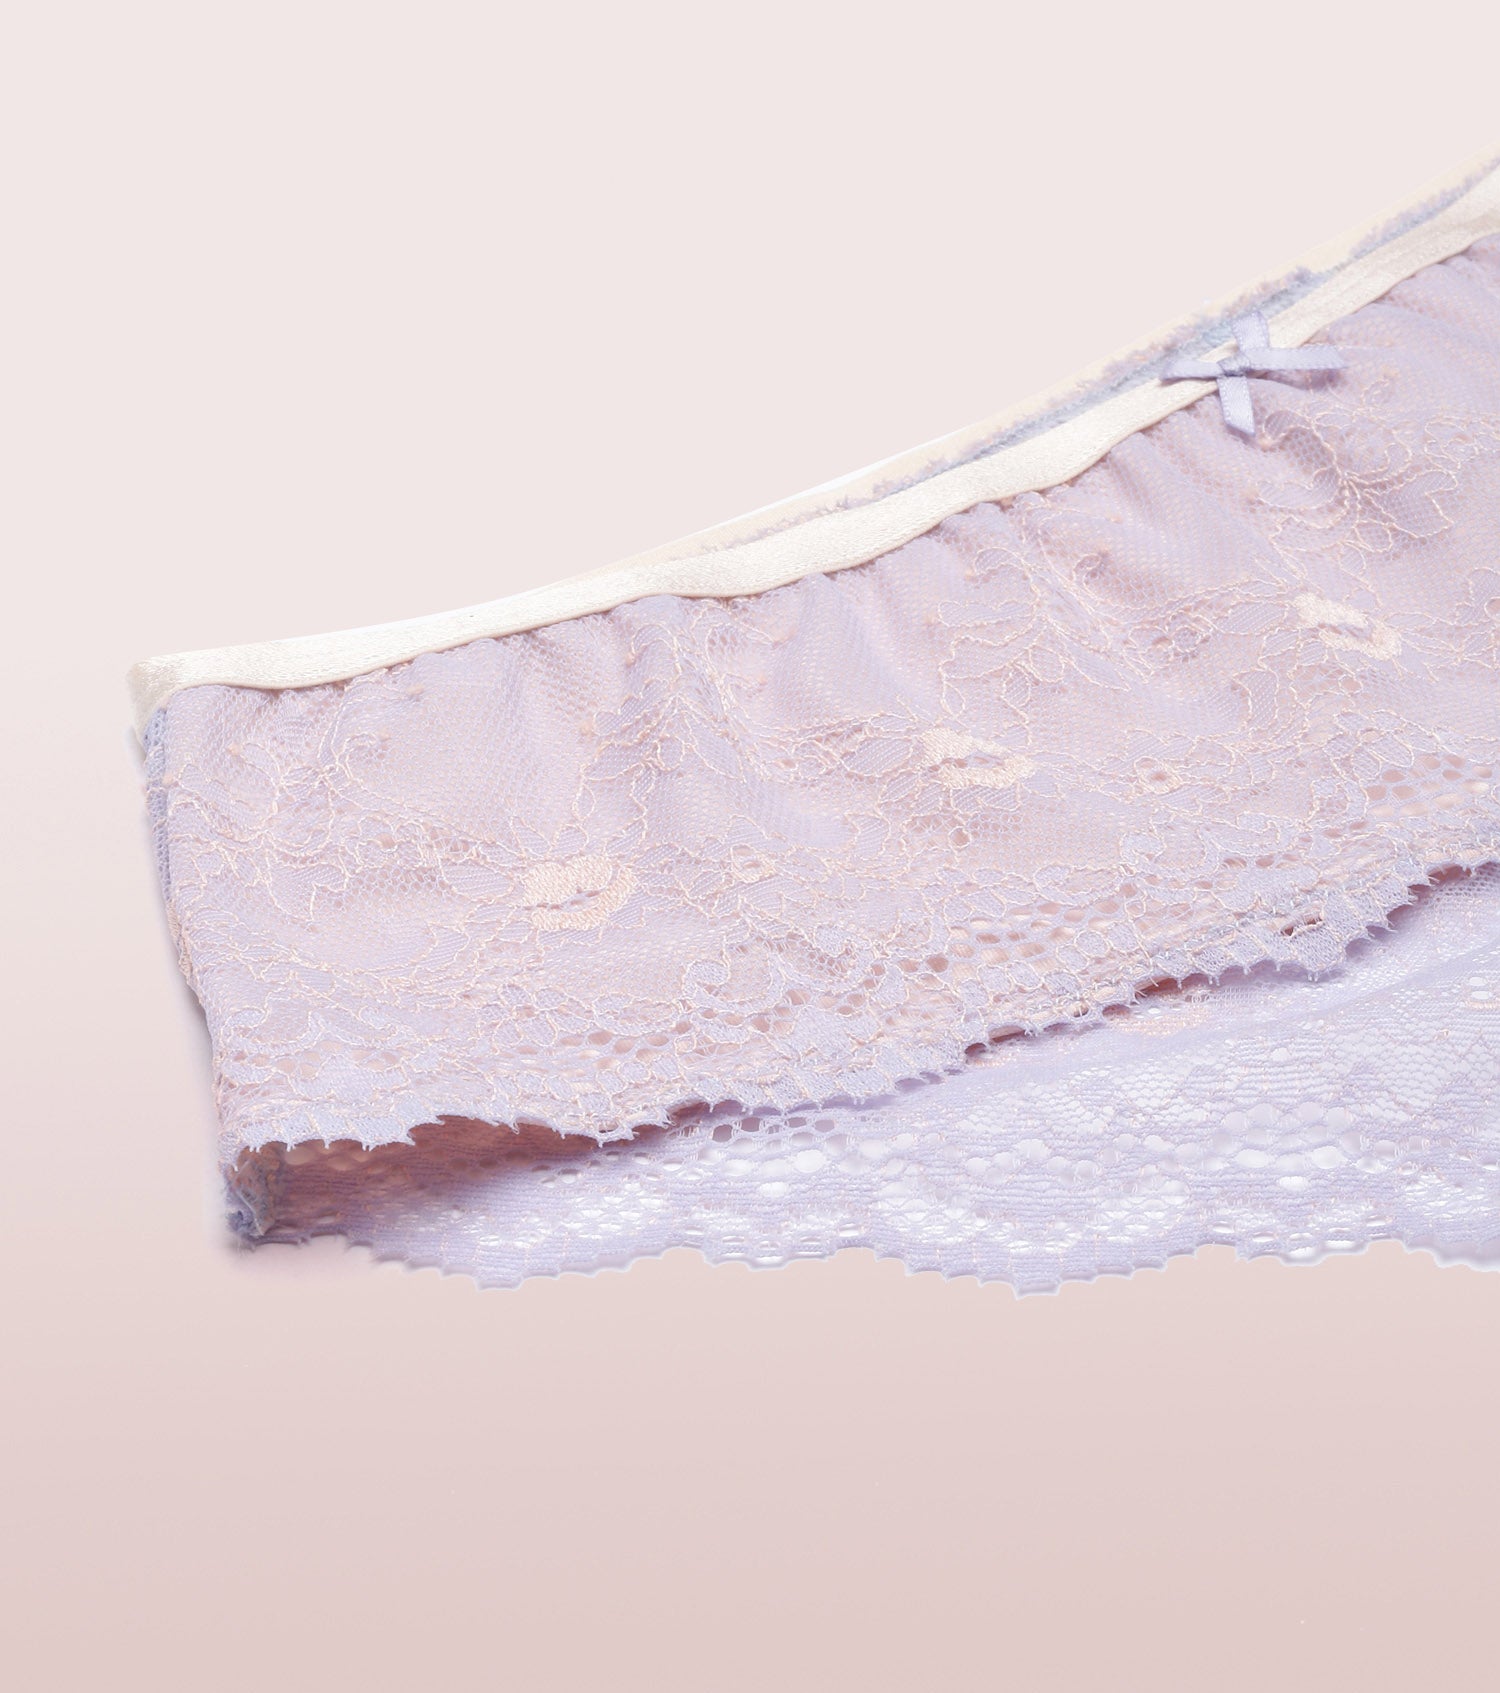 Enamor Lace Hipster Panty with Ultra Low Waist